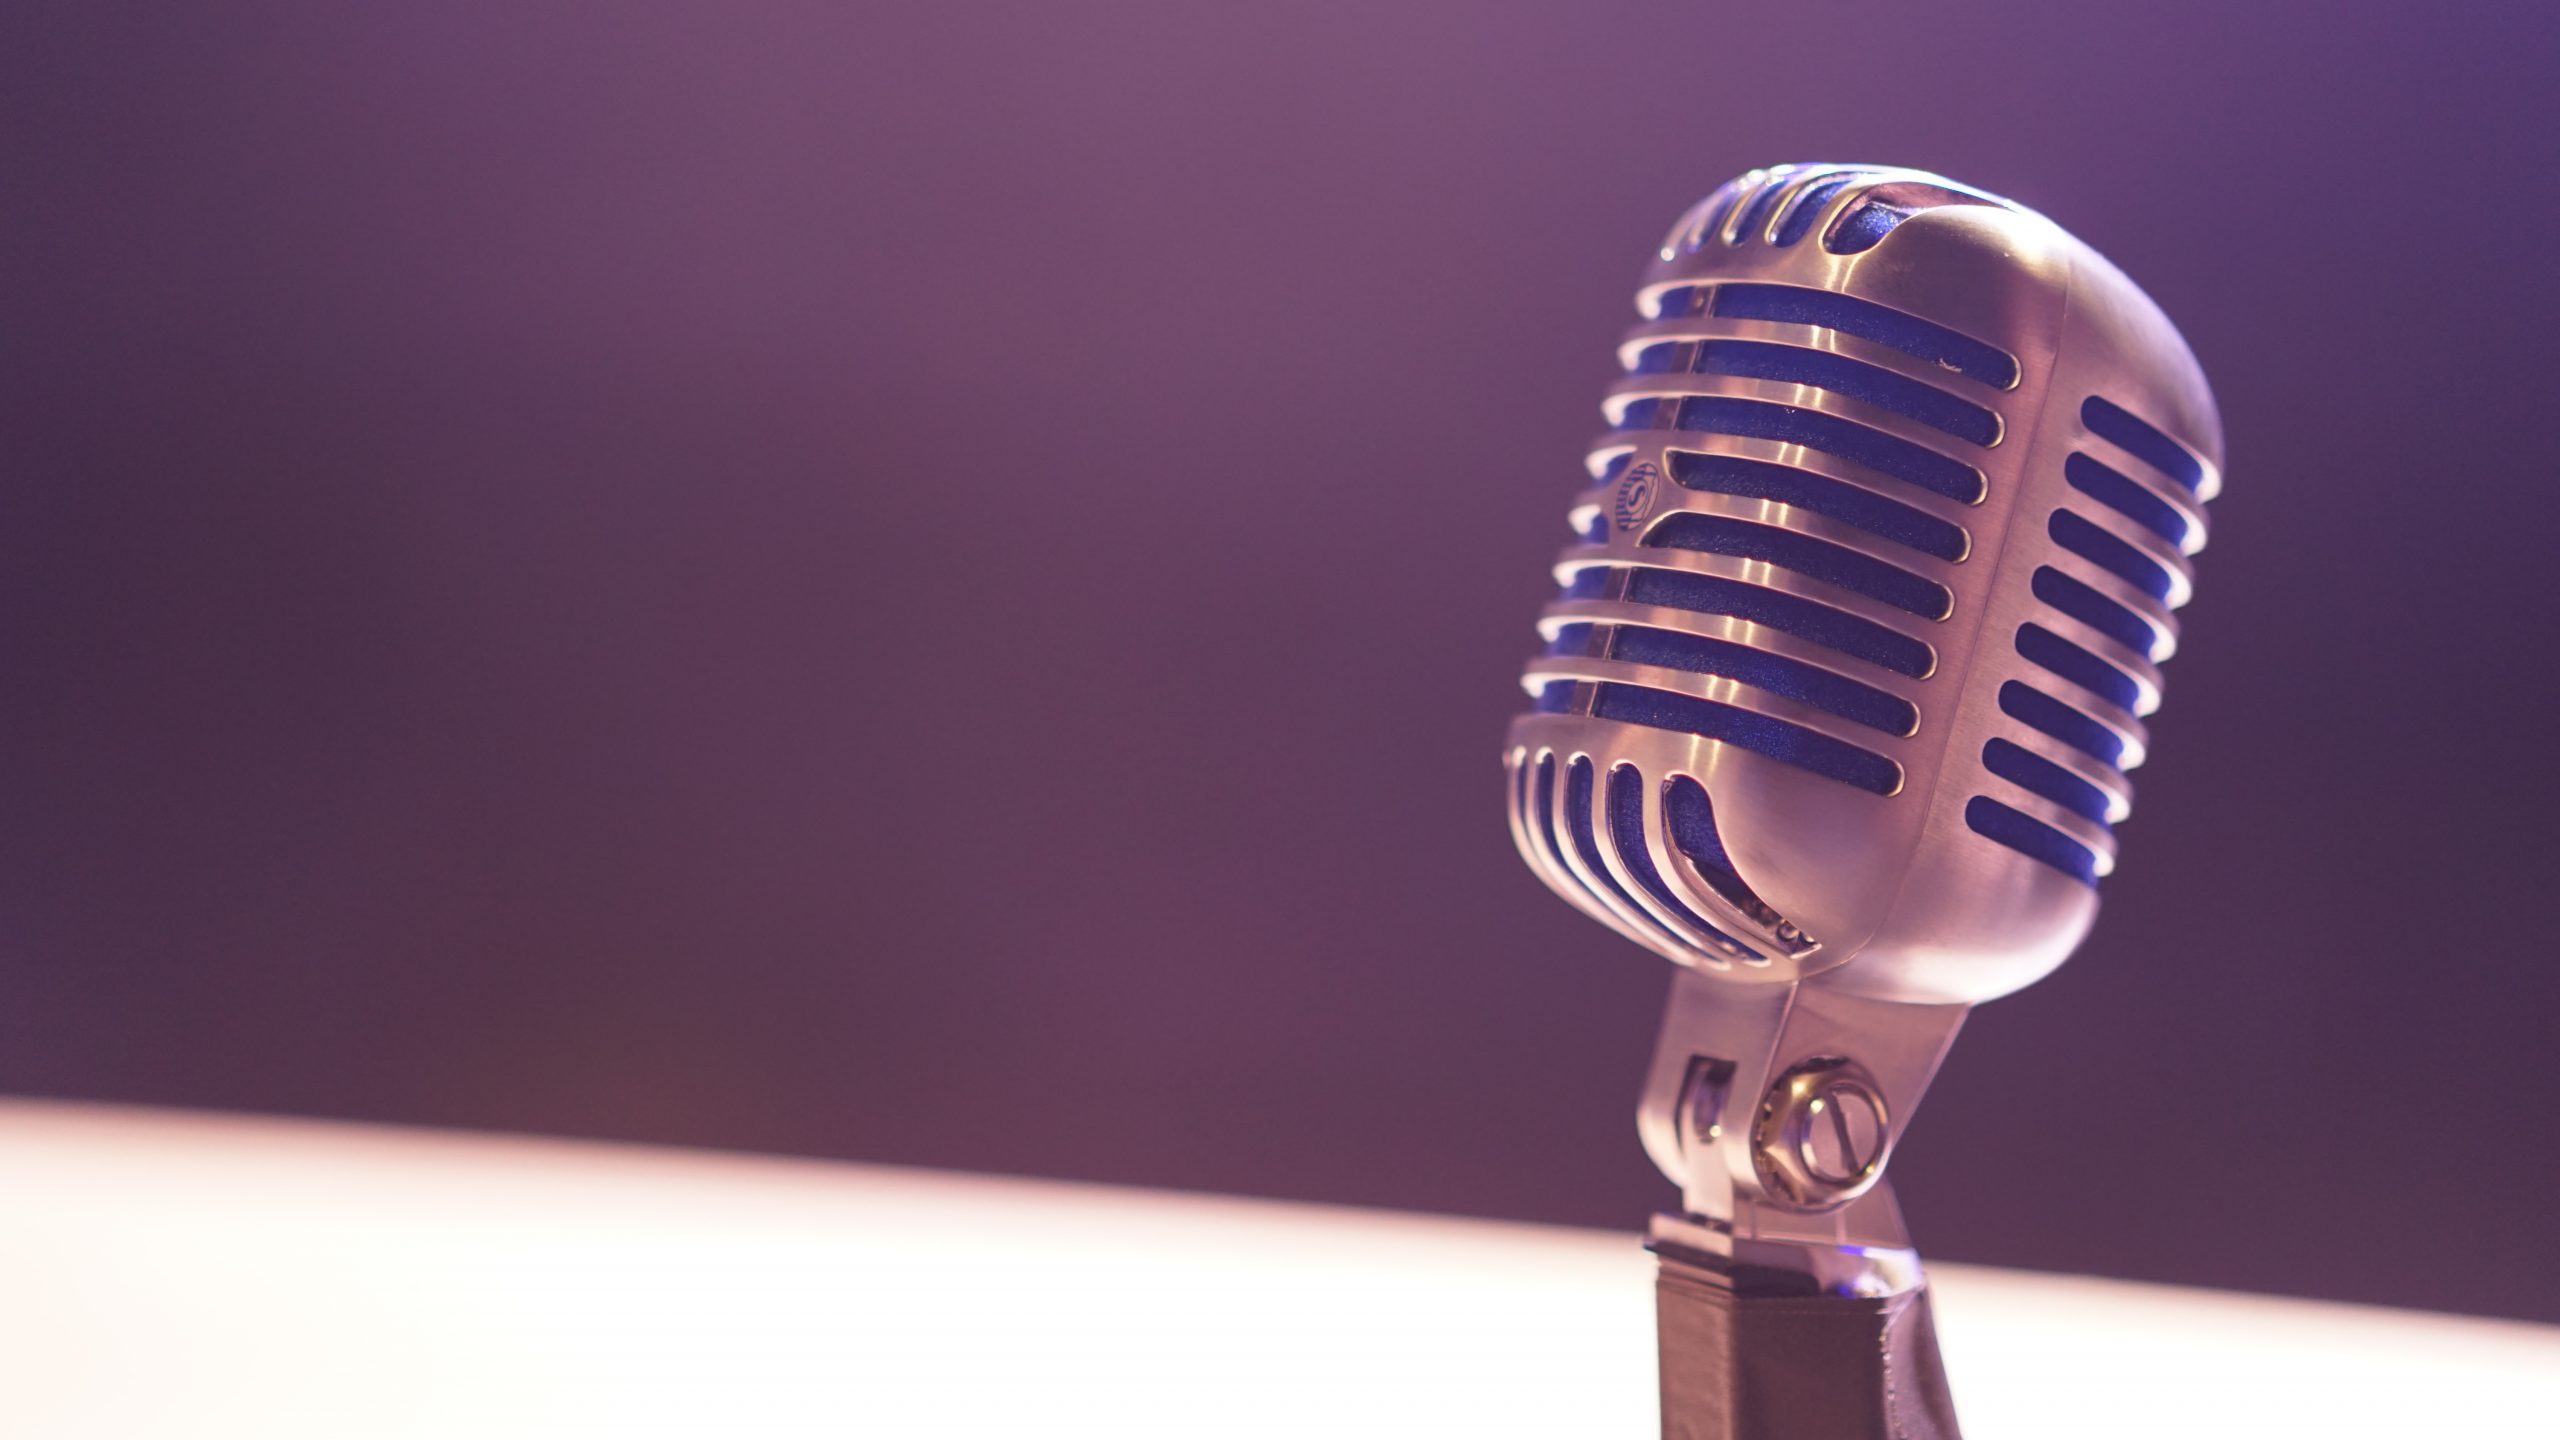 Podcast: What Hinders Innovation in the Legal Industry?